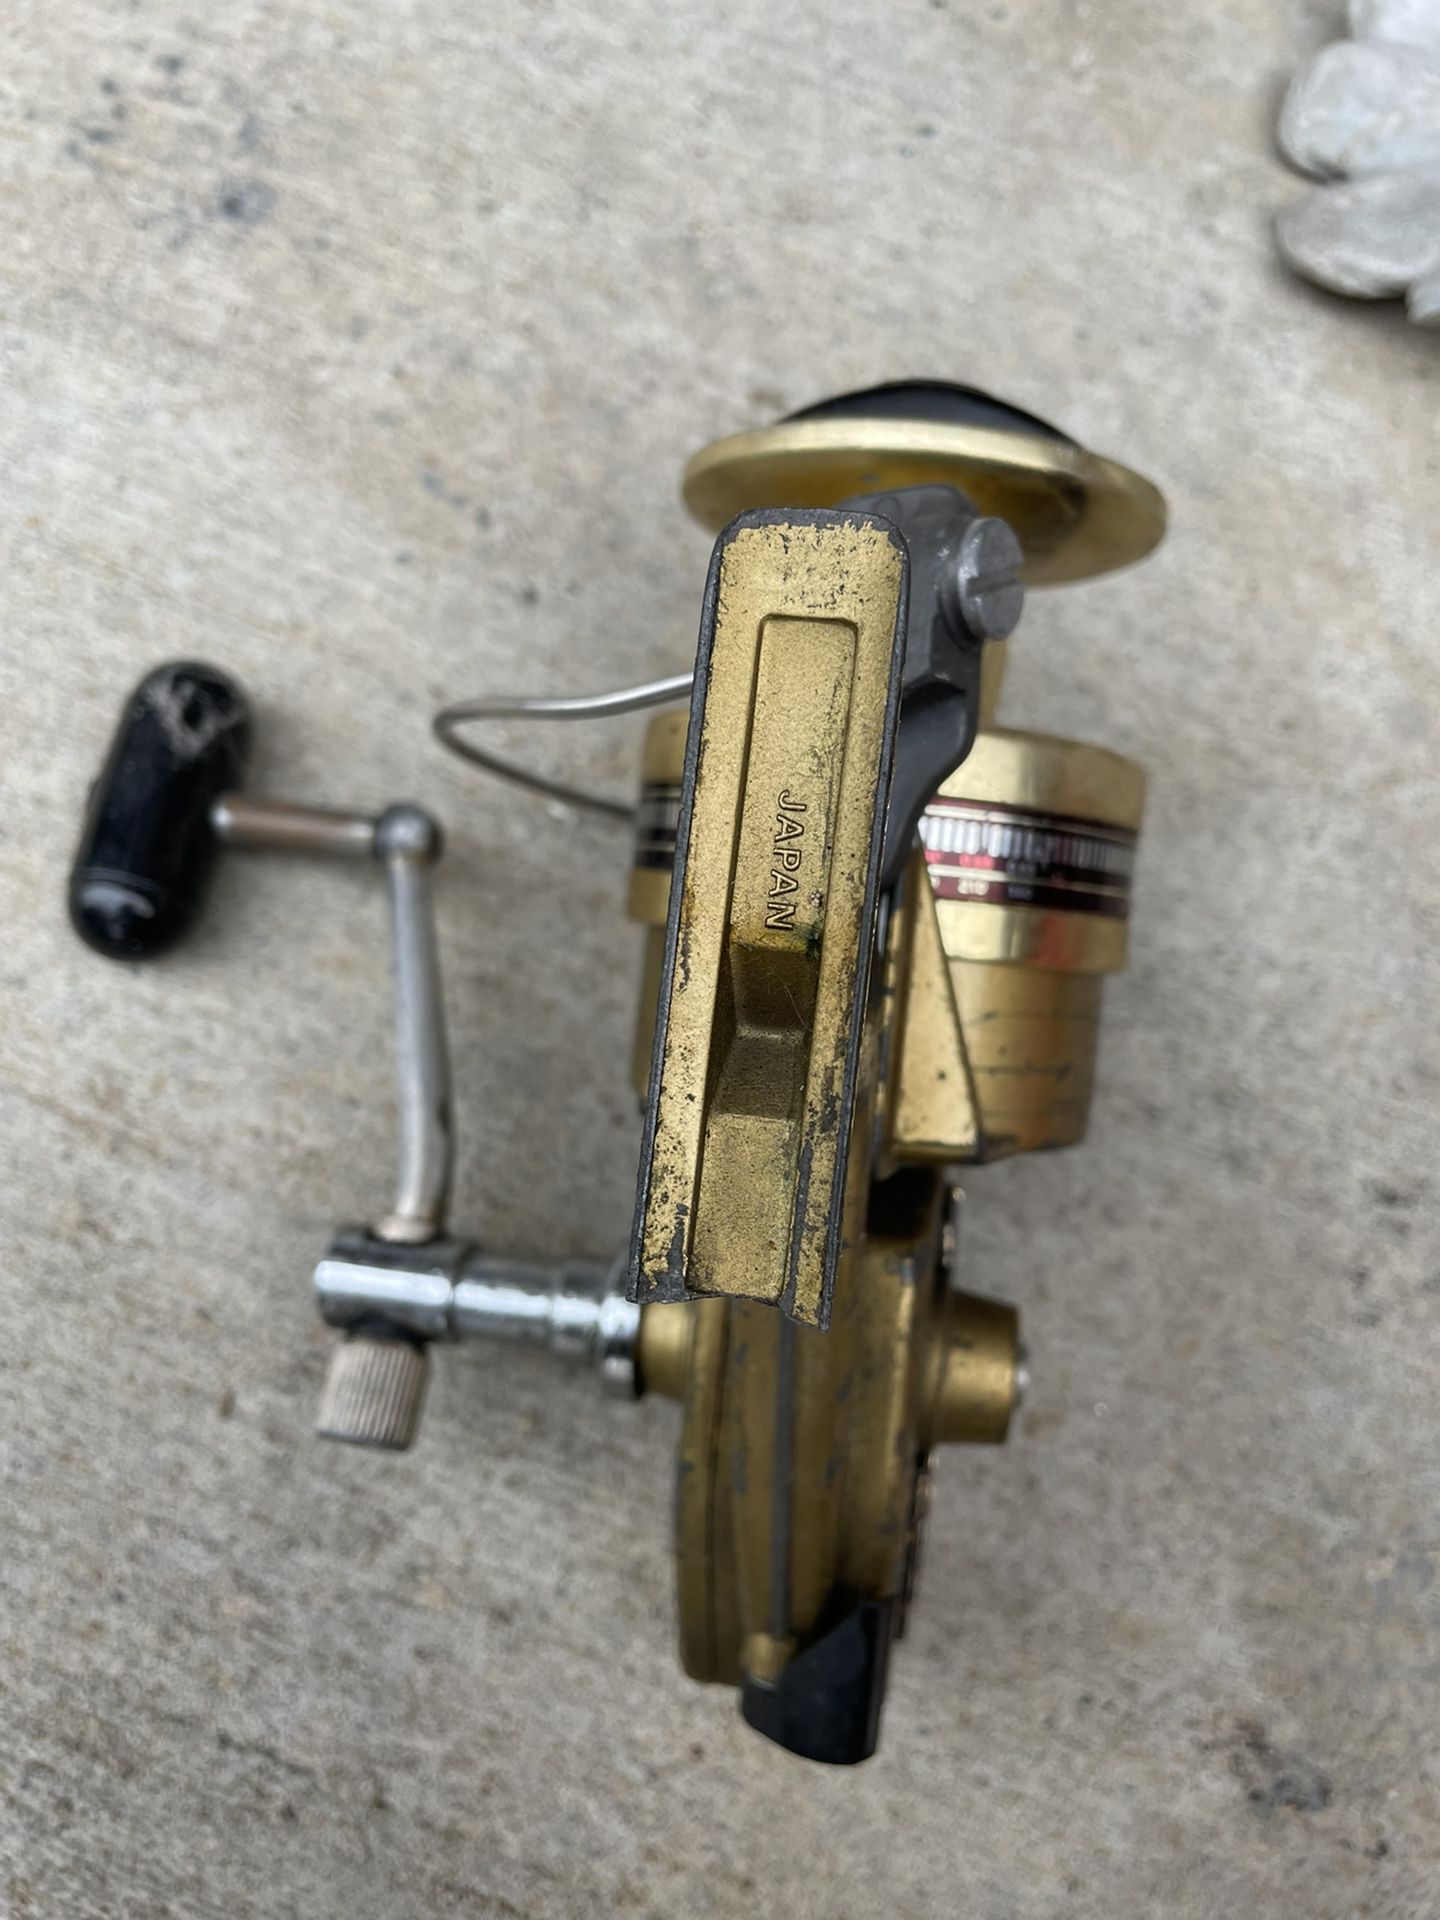 Daiwa Fishing Reel for Sale in Rowland Heights, CA - OfferUp